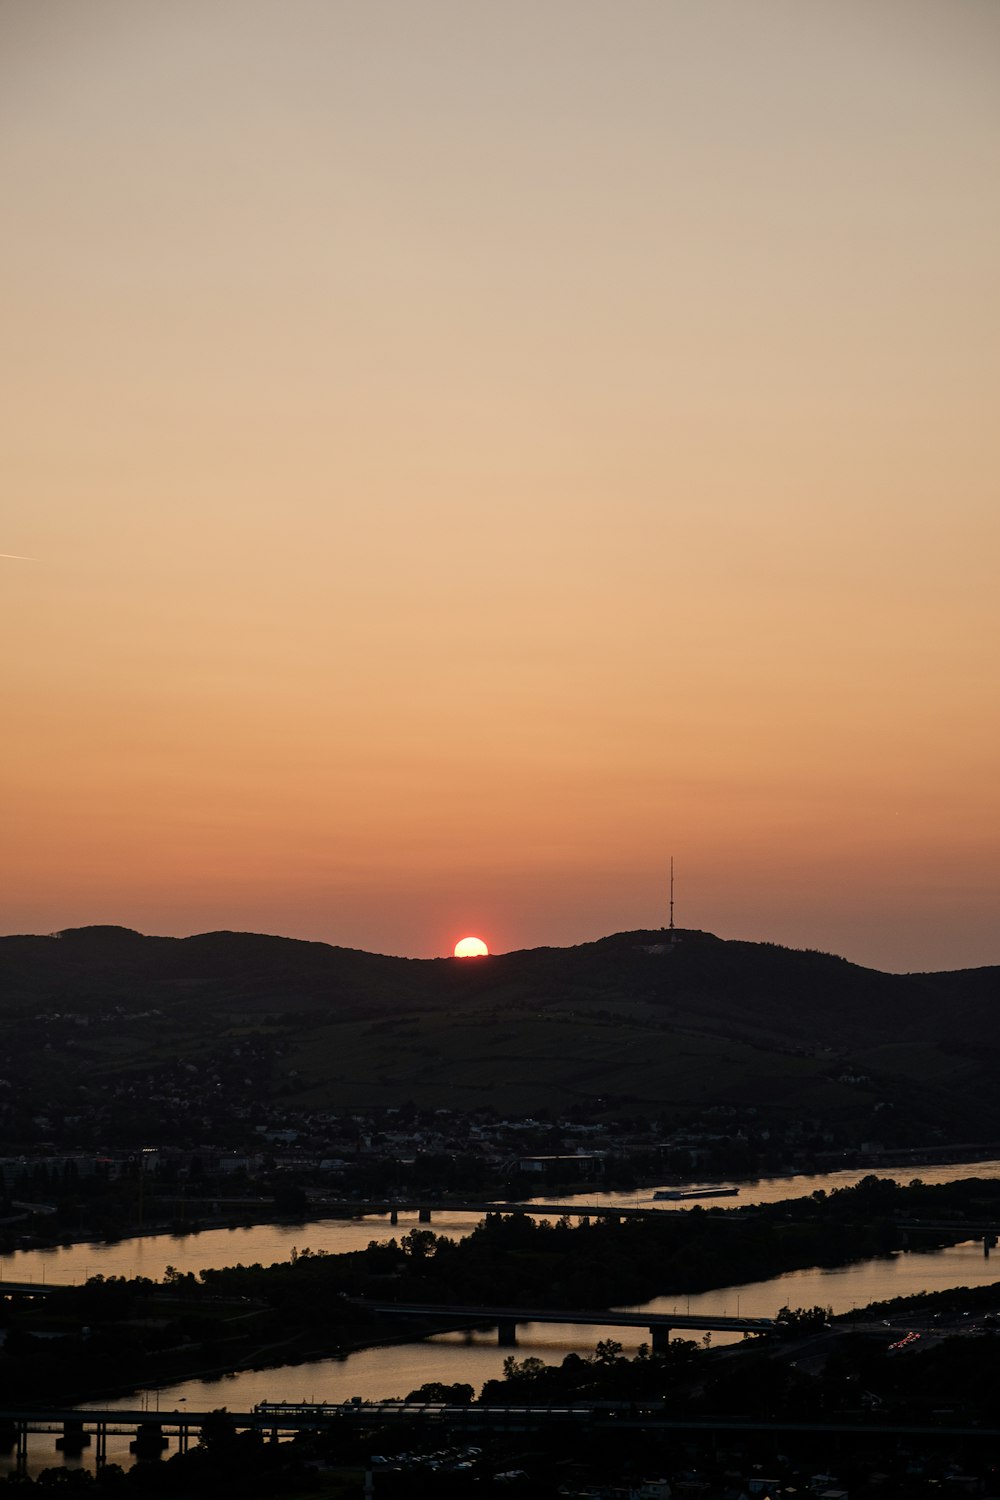 the sun is setting over a river and hills